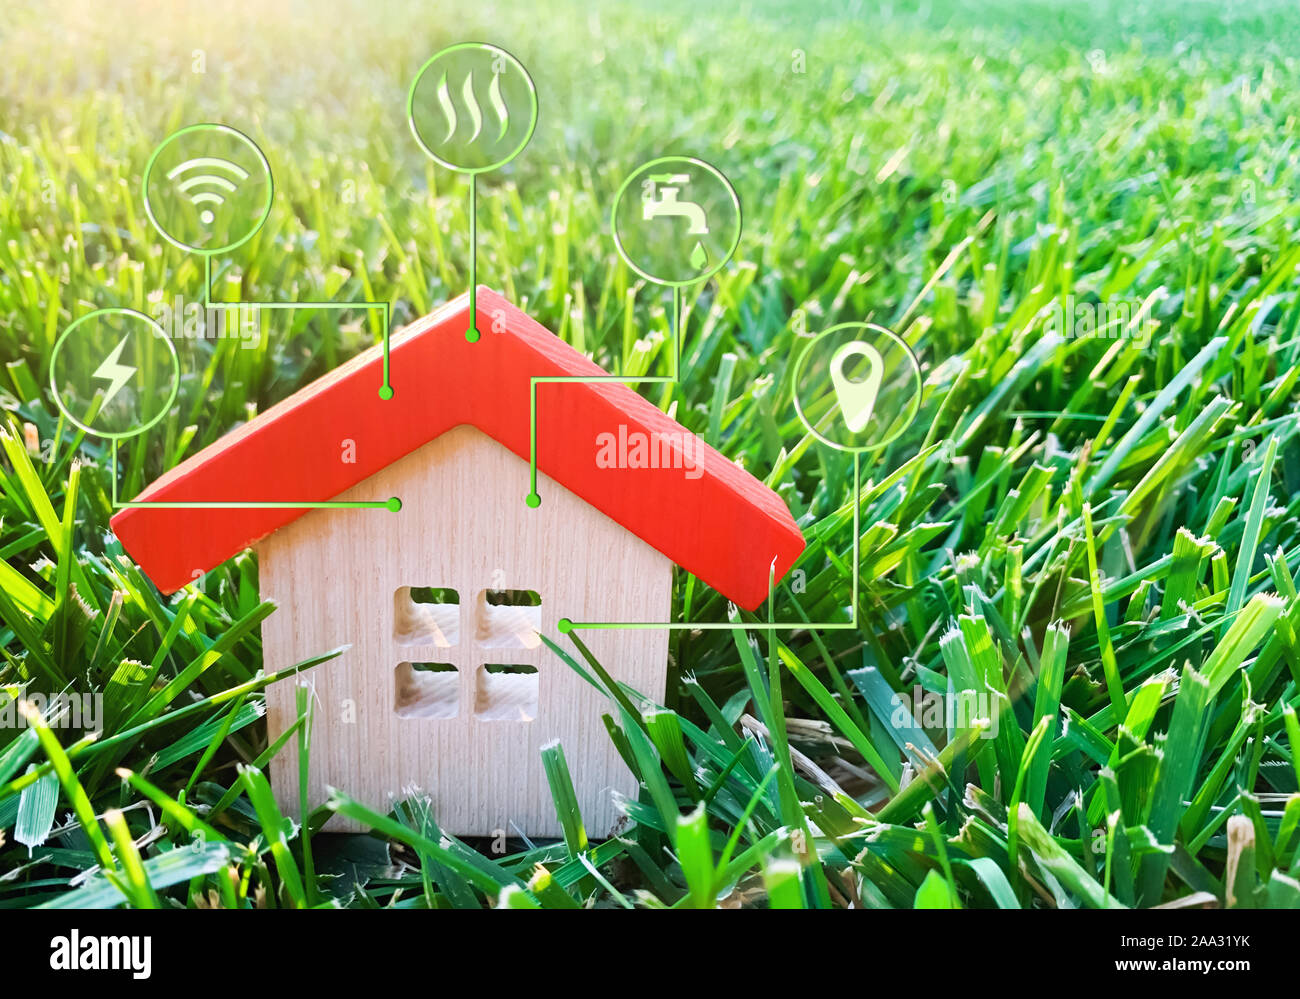 Miniature home and symbols of public utilities. Choosing a house to buy, assessing the cost and condition of the building. Location in the city. Repai Stock Photo